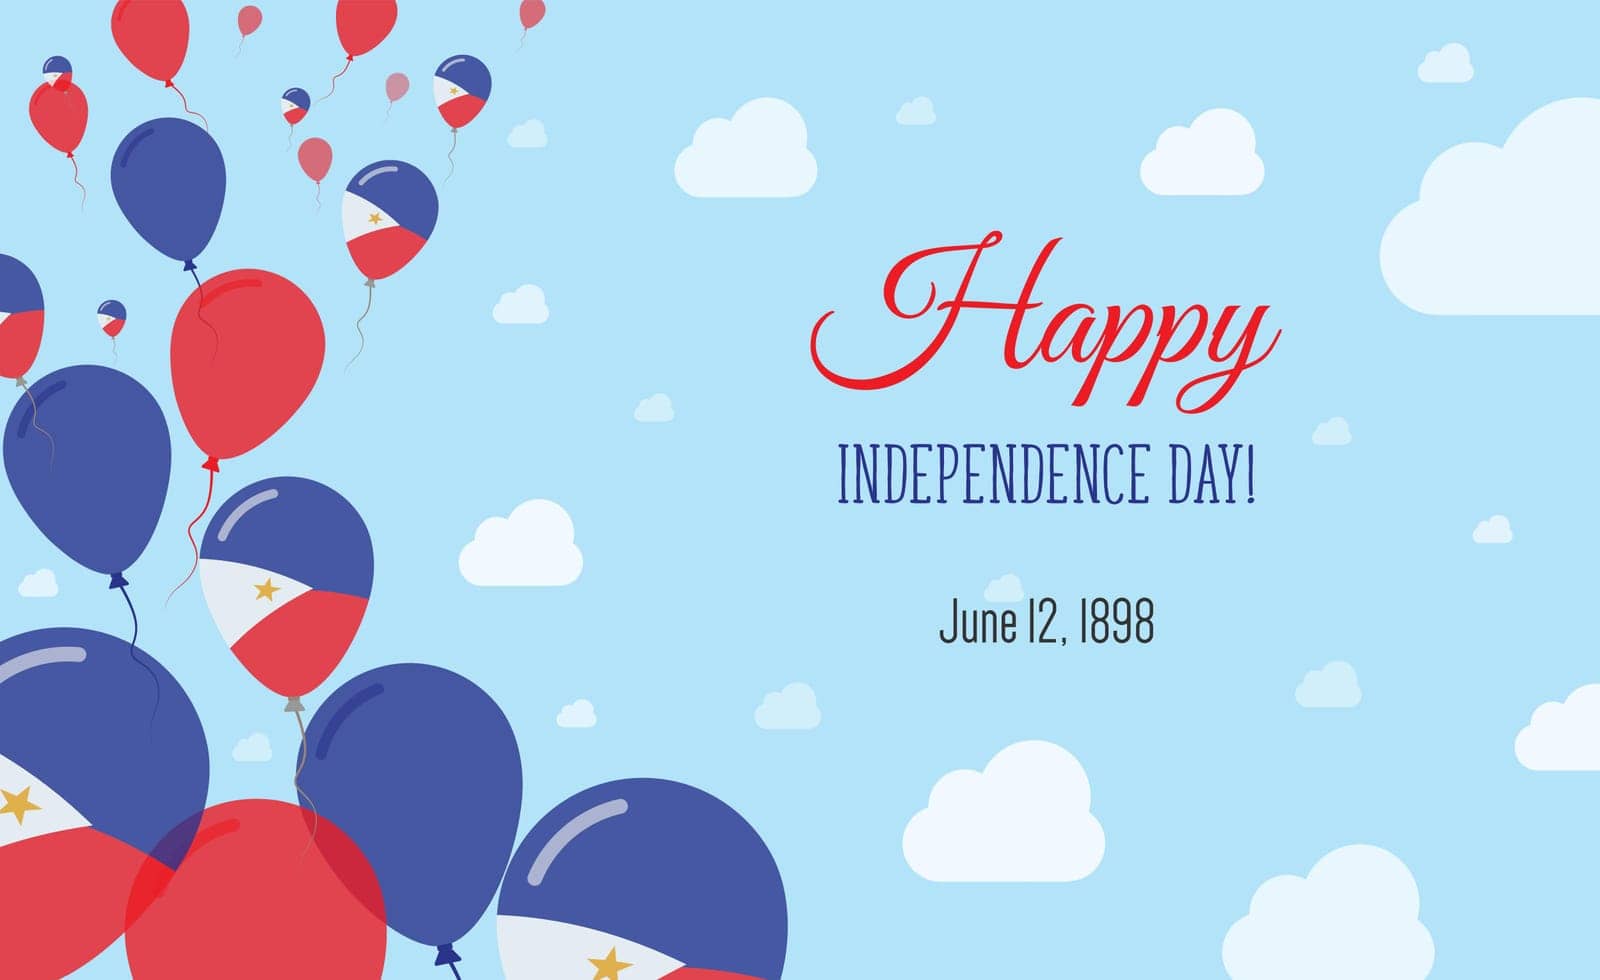 Philippines Independence Day Sparkling Patriotic Poster. Row of Balloons in Colors of the Filipino Flag. Greeting Card with National Flags, Blue Skyes and Clouds.